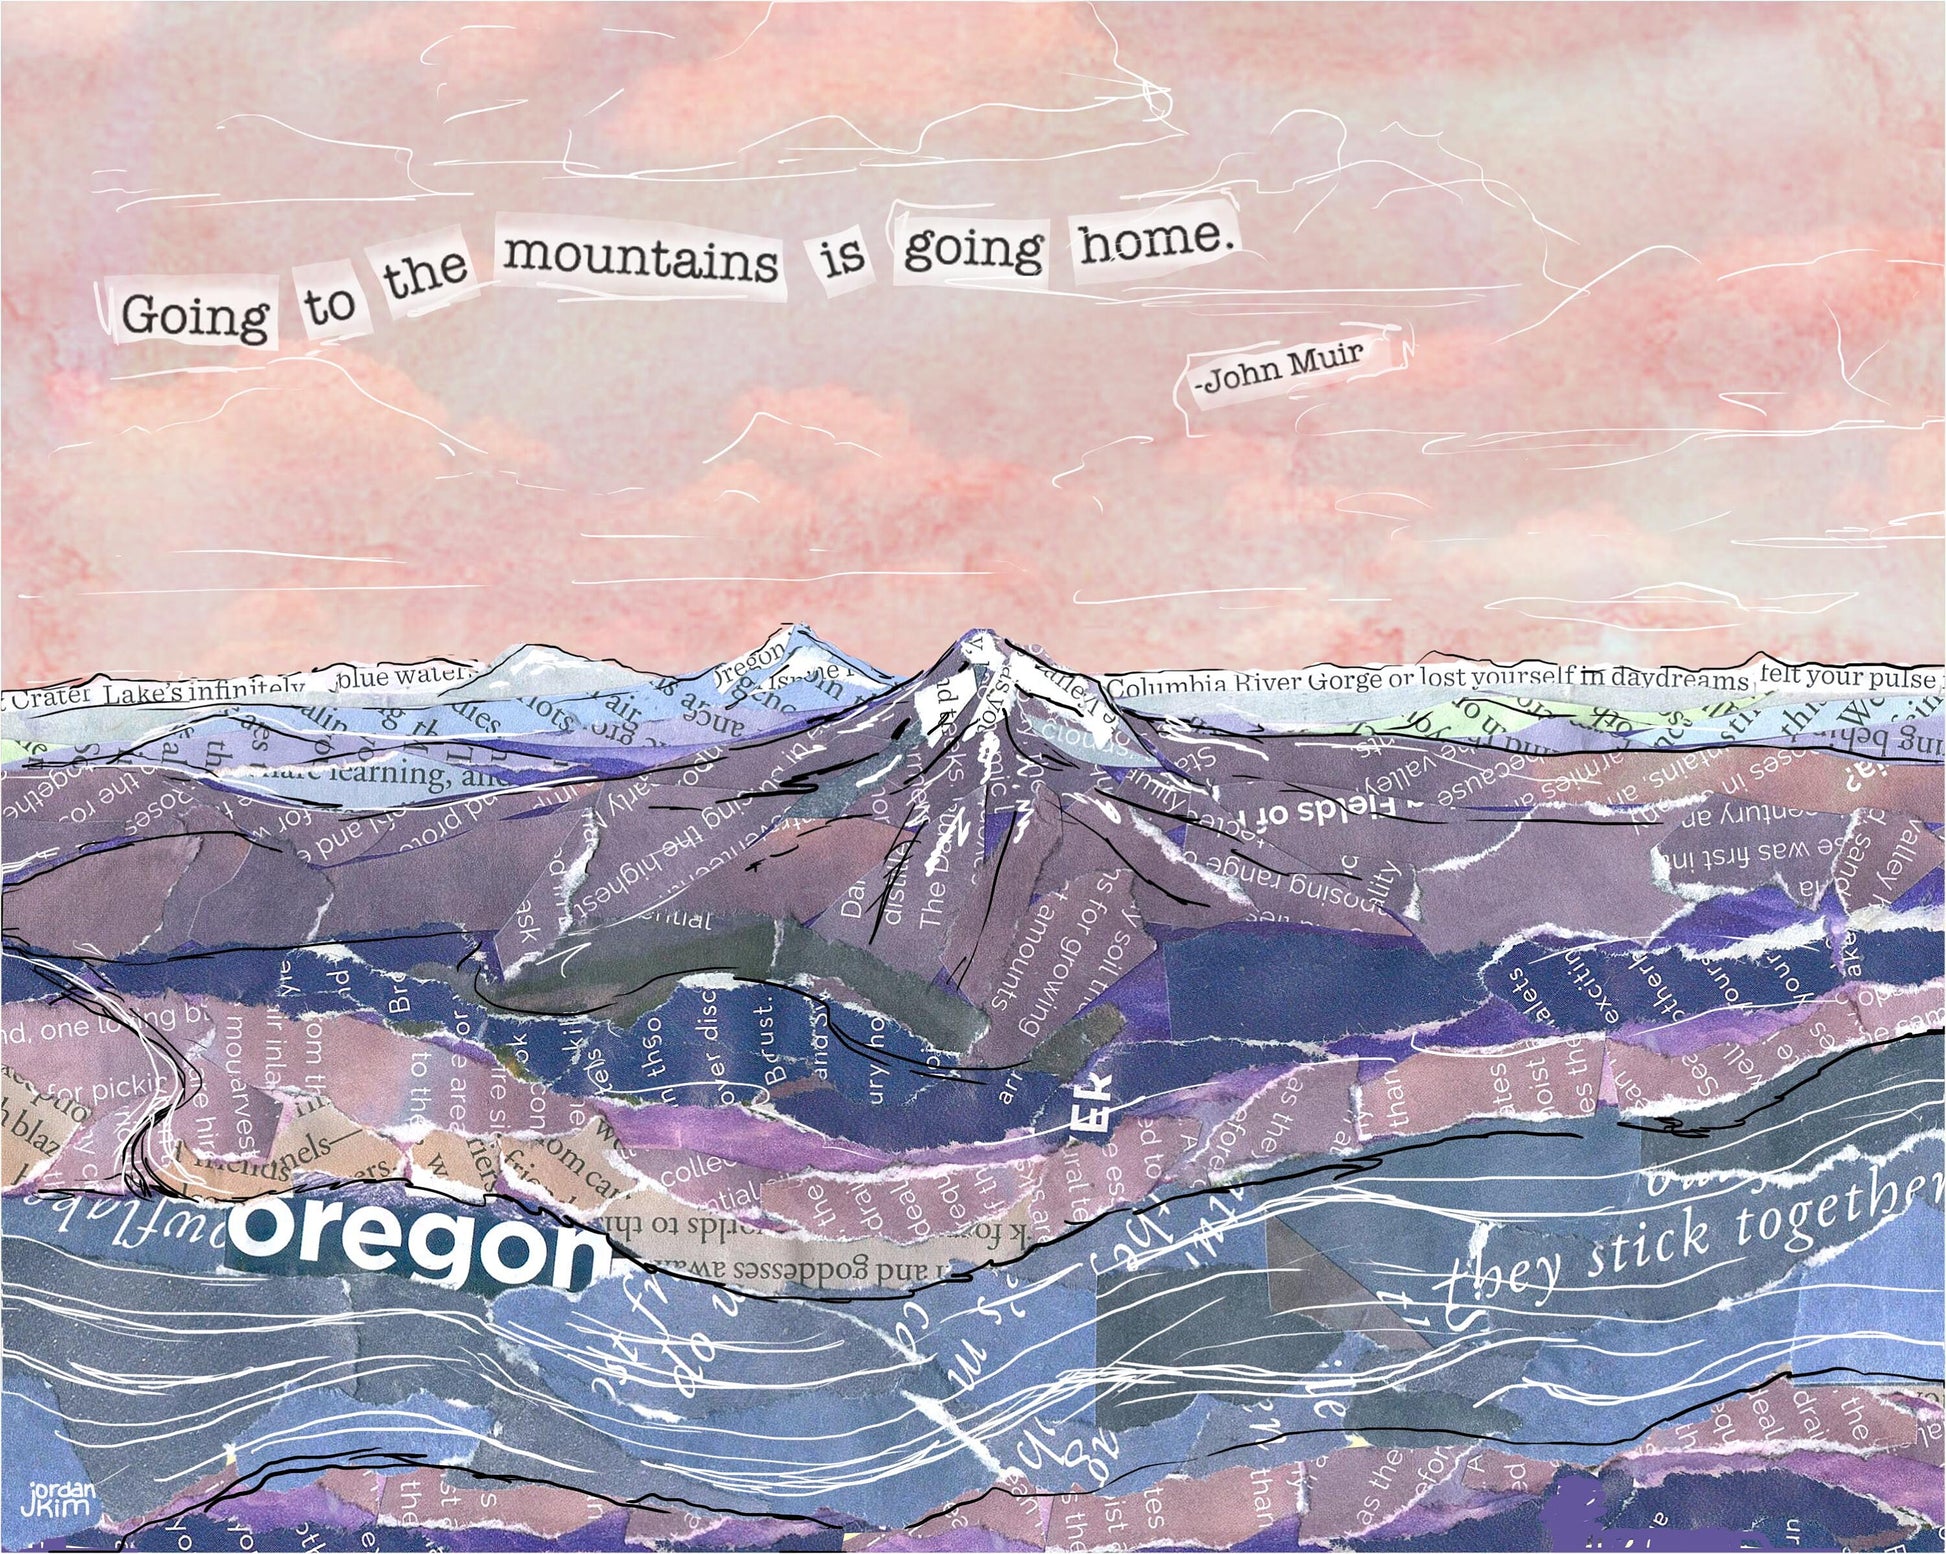 Greeting Card of the Oregon Cascade Mountains - John Muir quote - Order a Custom Design for Your Home Town! - Blank Inside